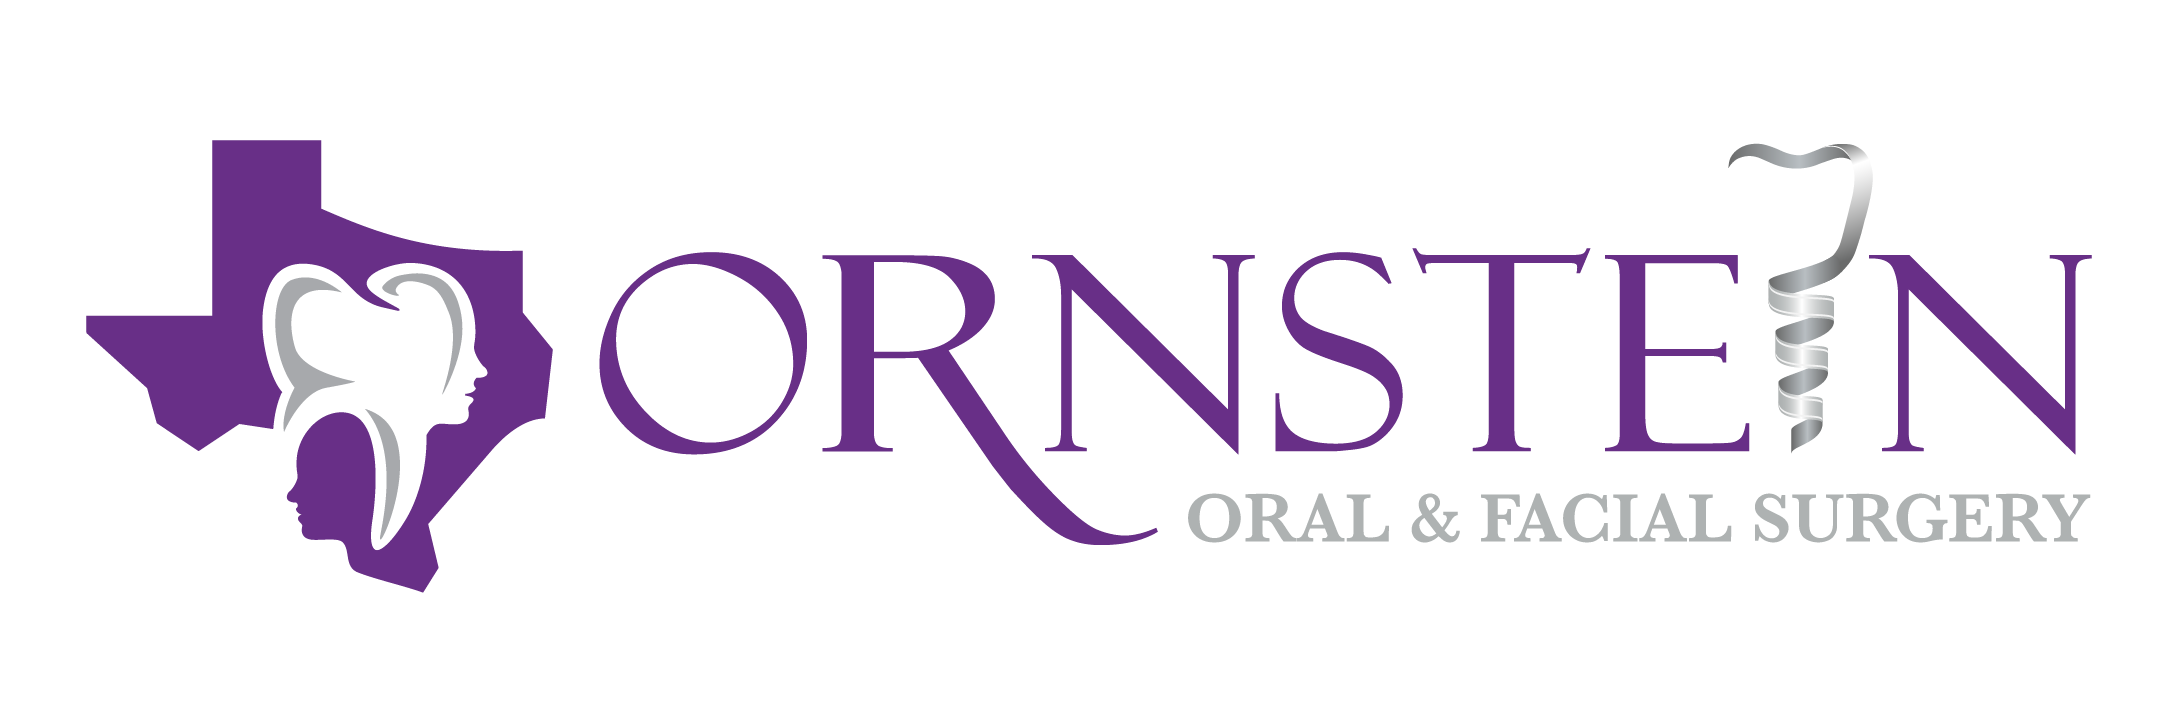 Link to Ornstein Oral & Facial Surgery home page